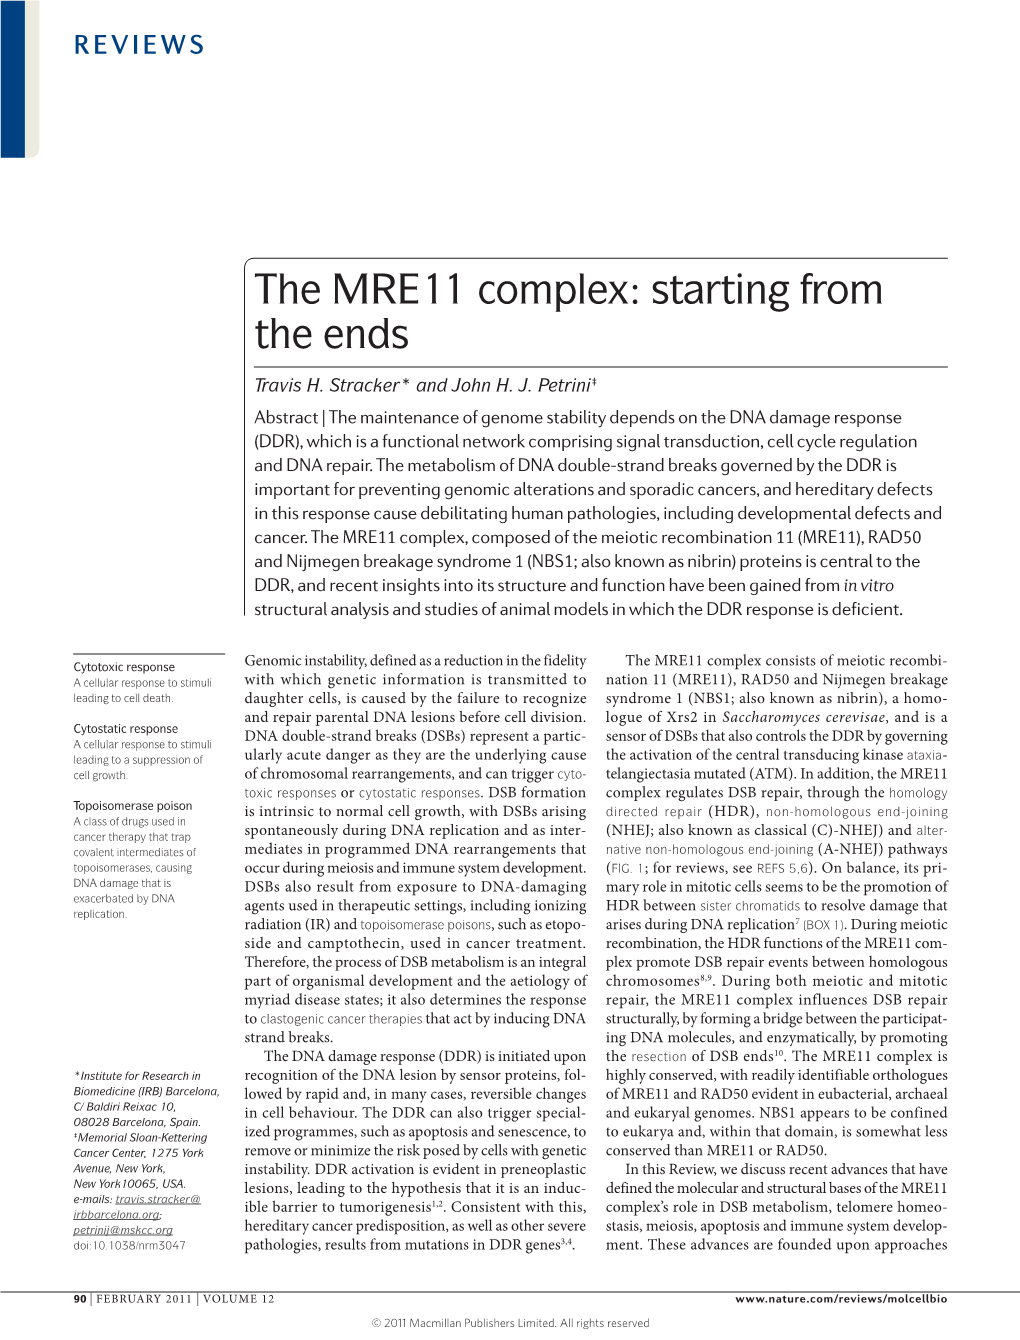 The MRE11 Complex: Starting from the Ends